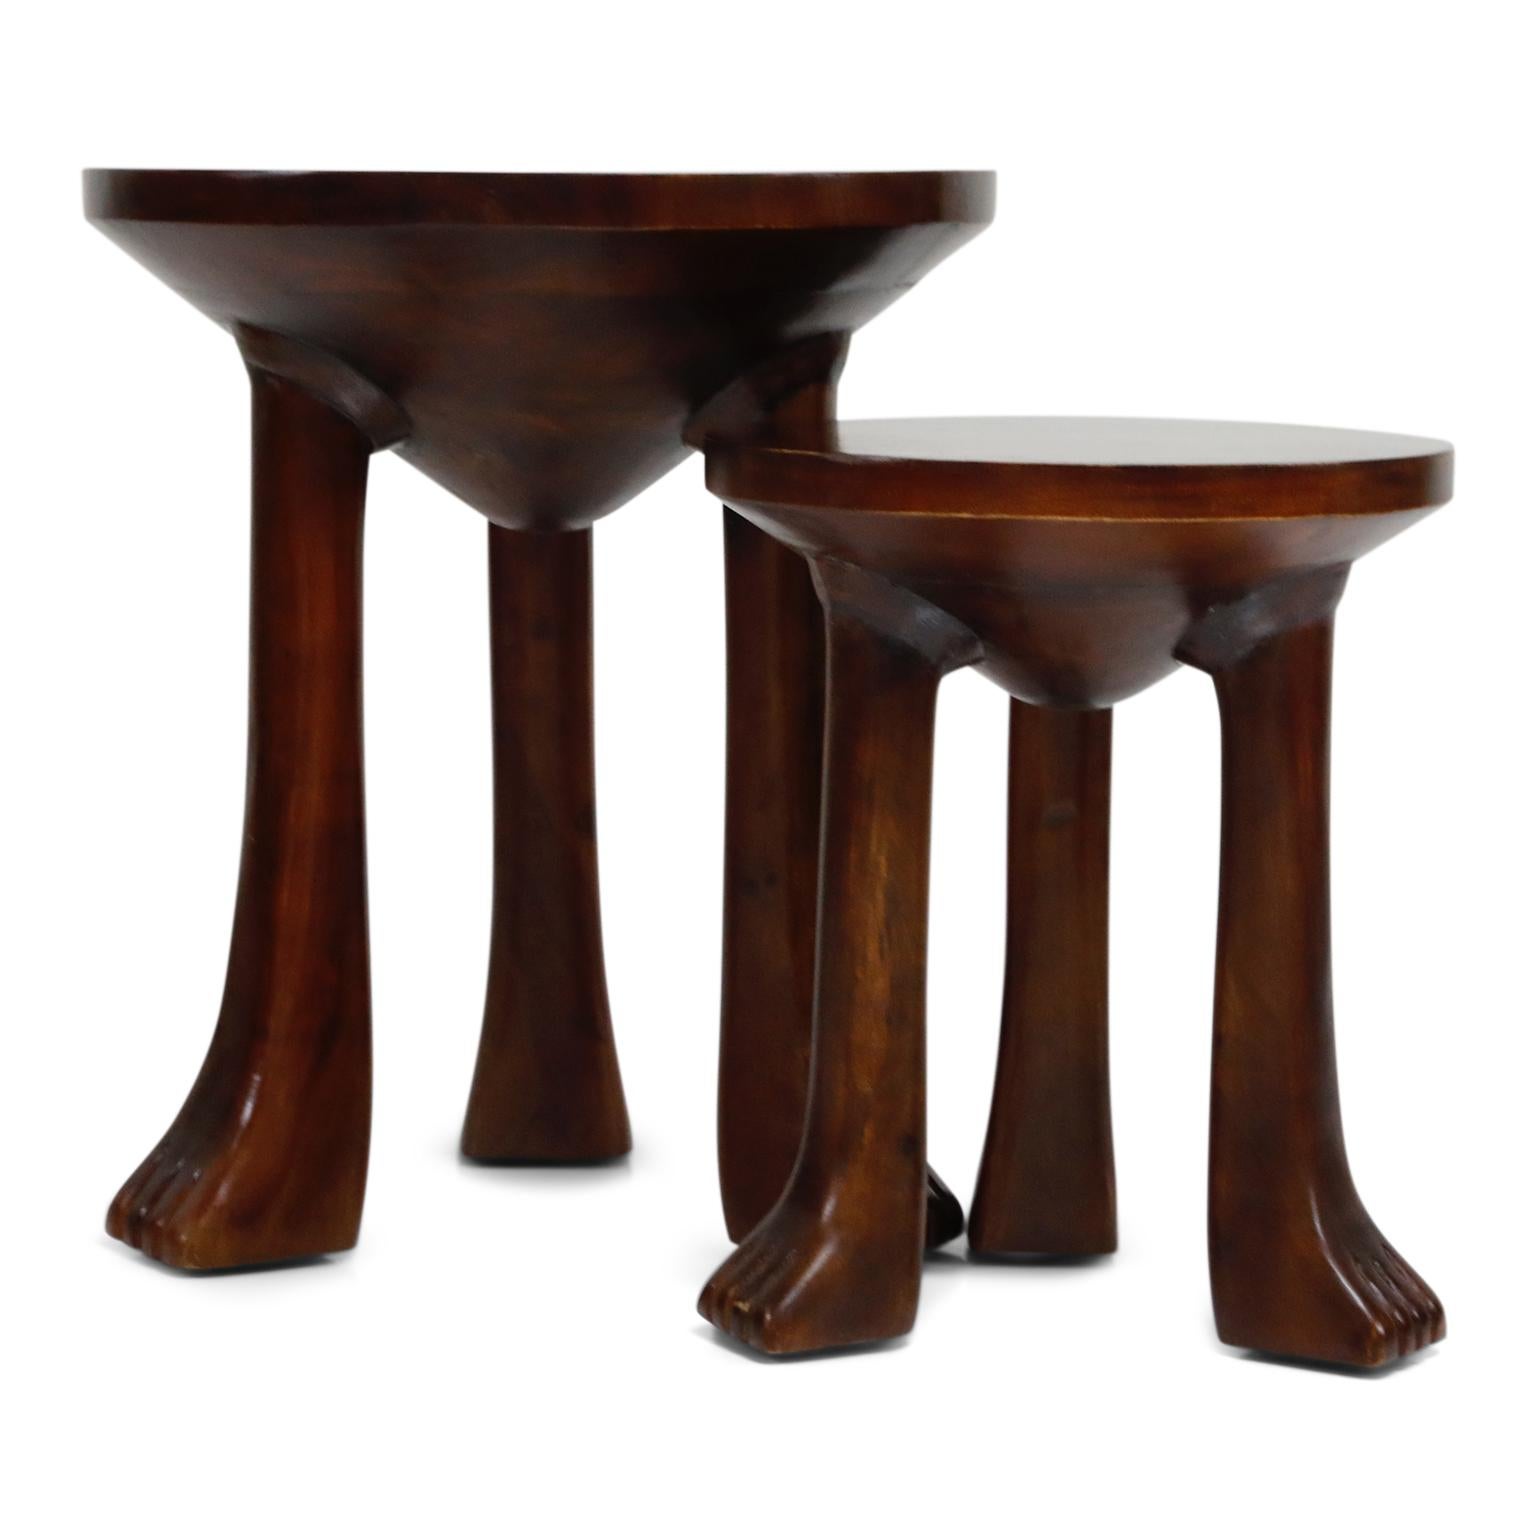 Carved Teak Three-Legged Lionfoot Stools in the Style of John Dickinson 5